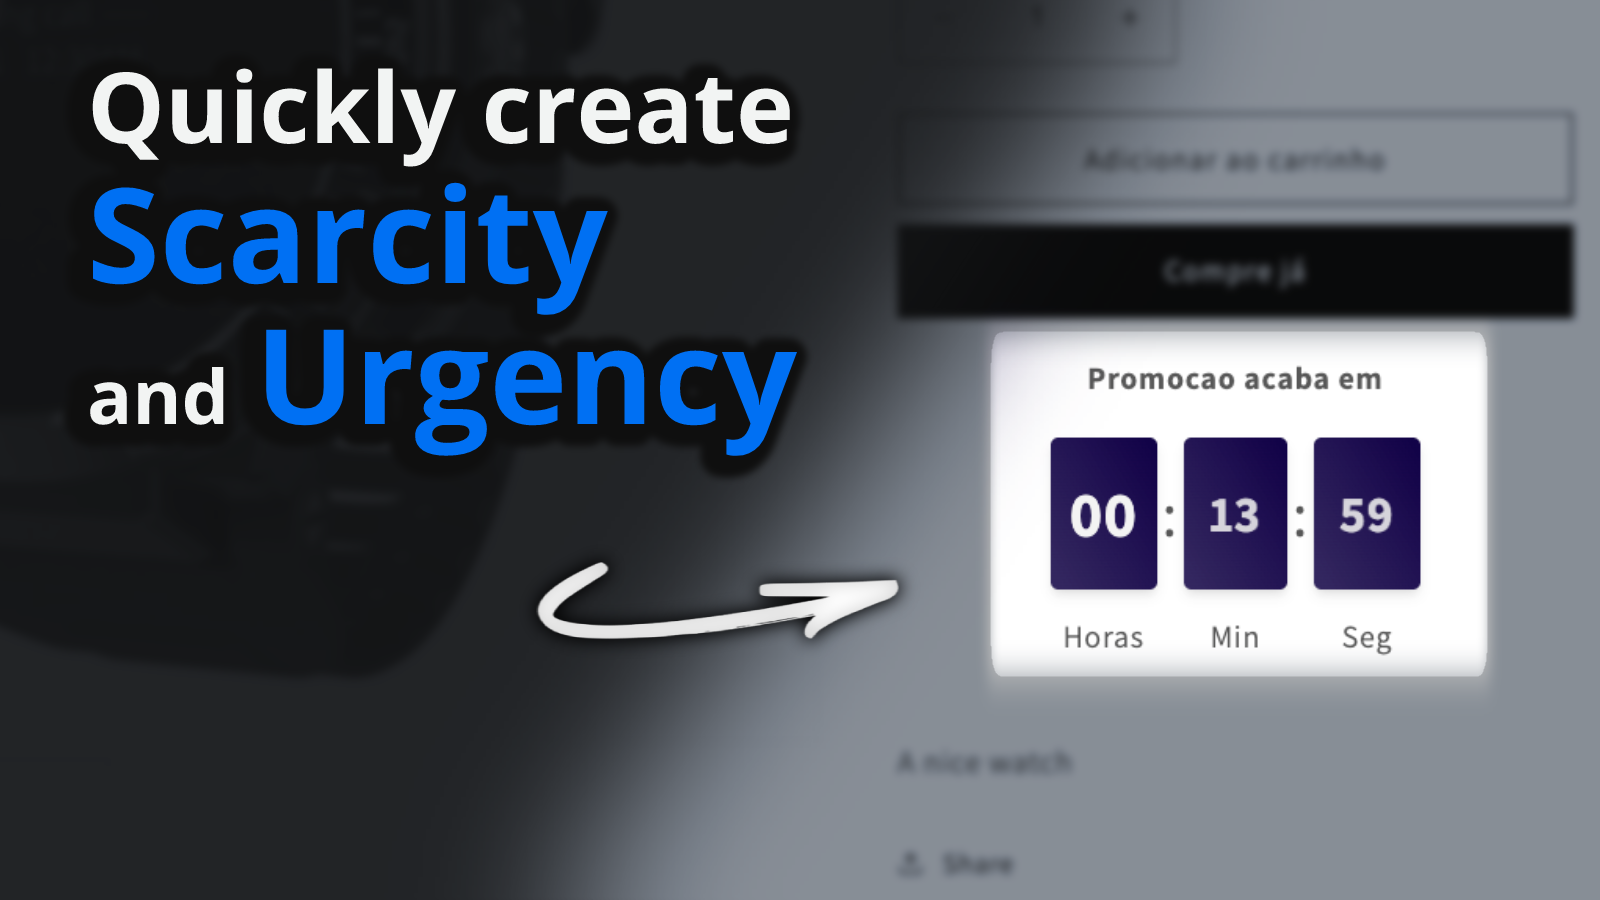 Quickly create scarcity and urgency